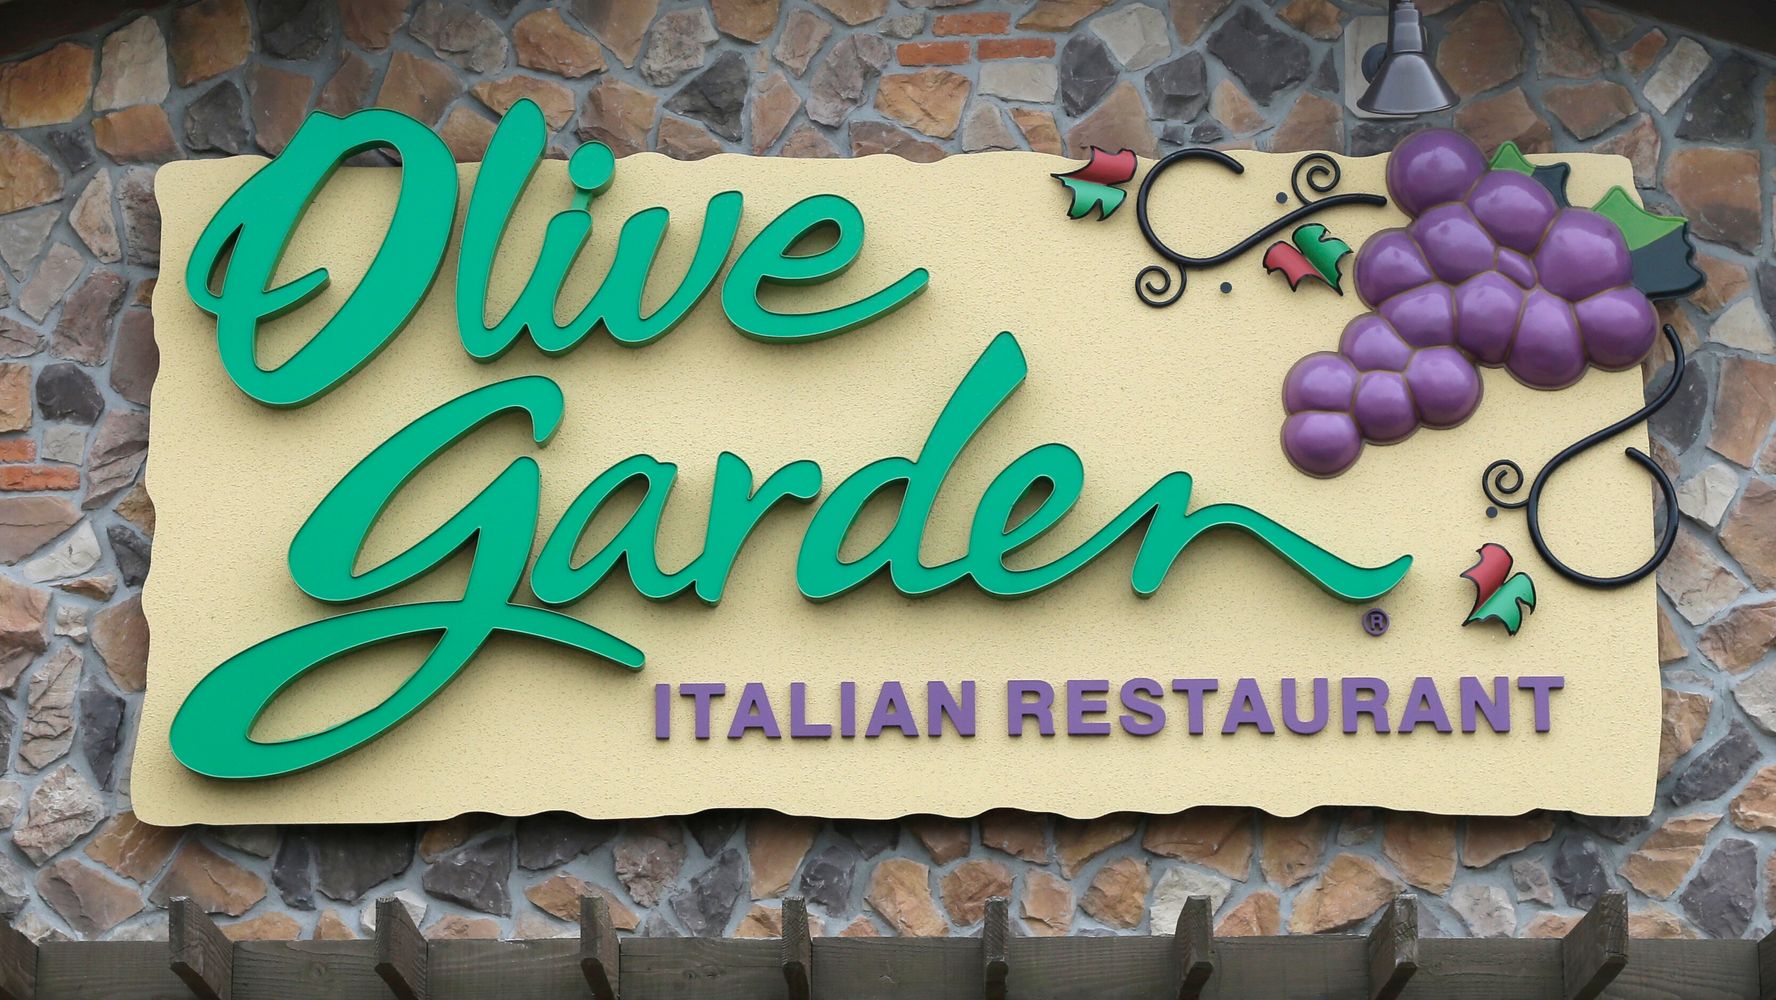 Olive Garden Manager Fired After Complying With Request For Non